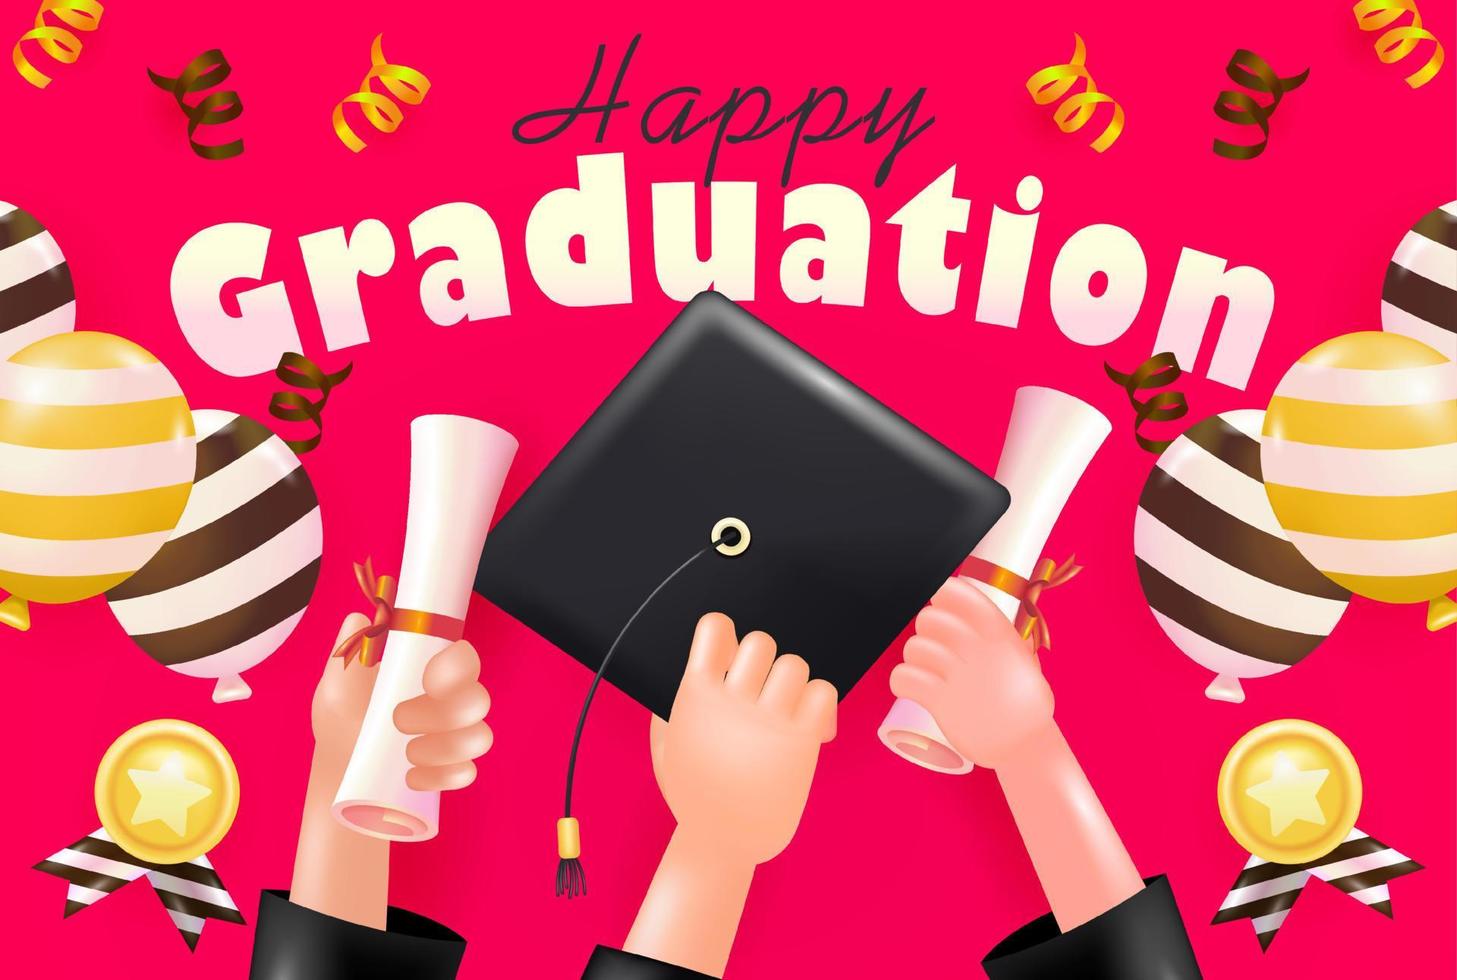 Happy Graduation. 3d vector of a hand holding a cap and certificate, with balloon and medal ornaments